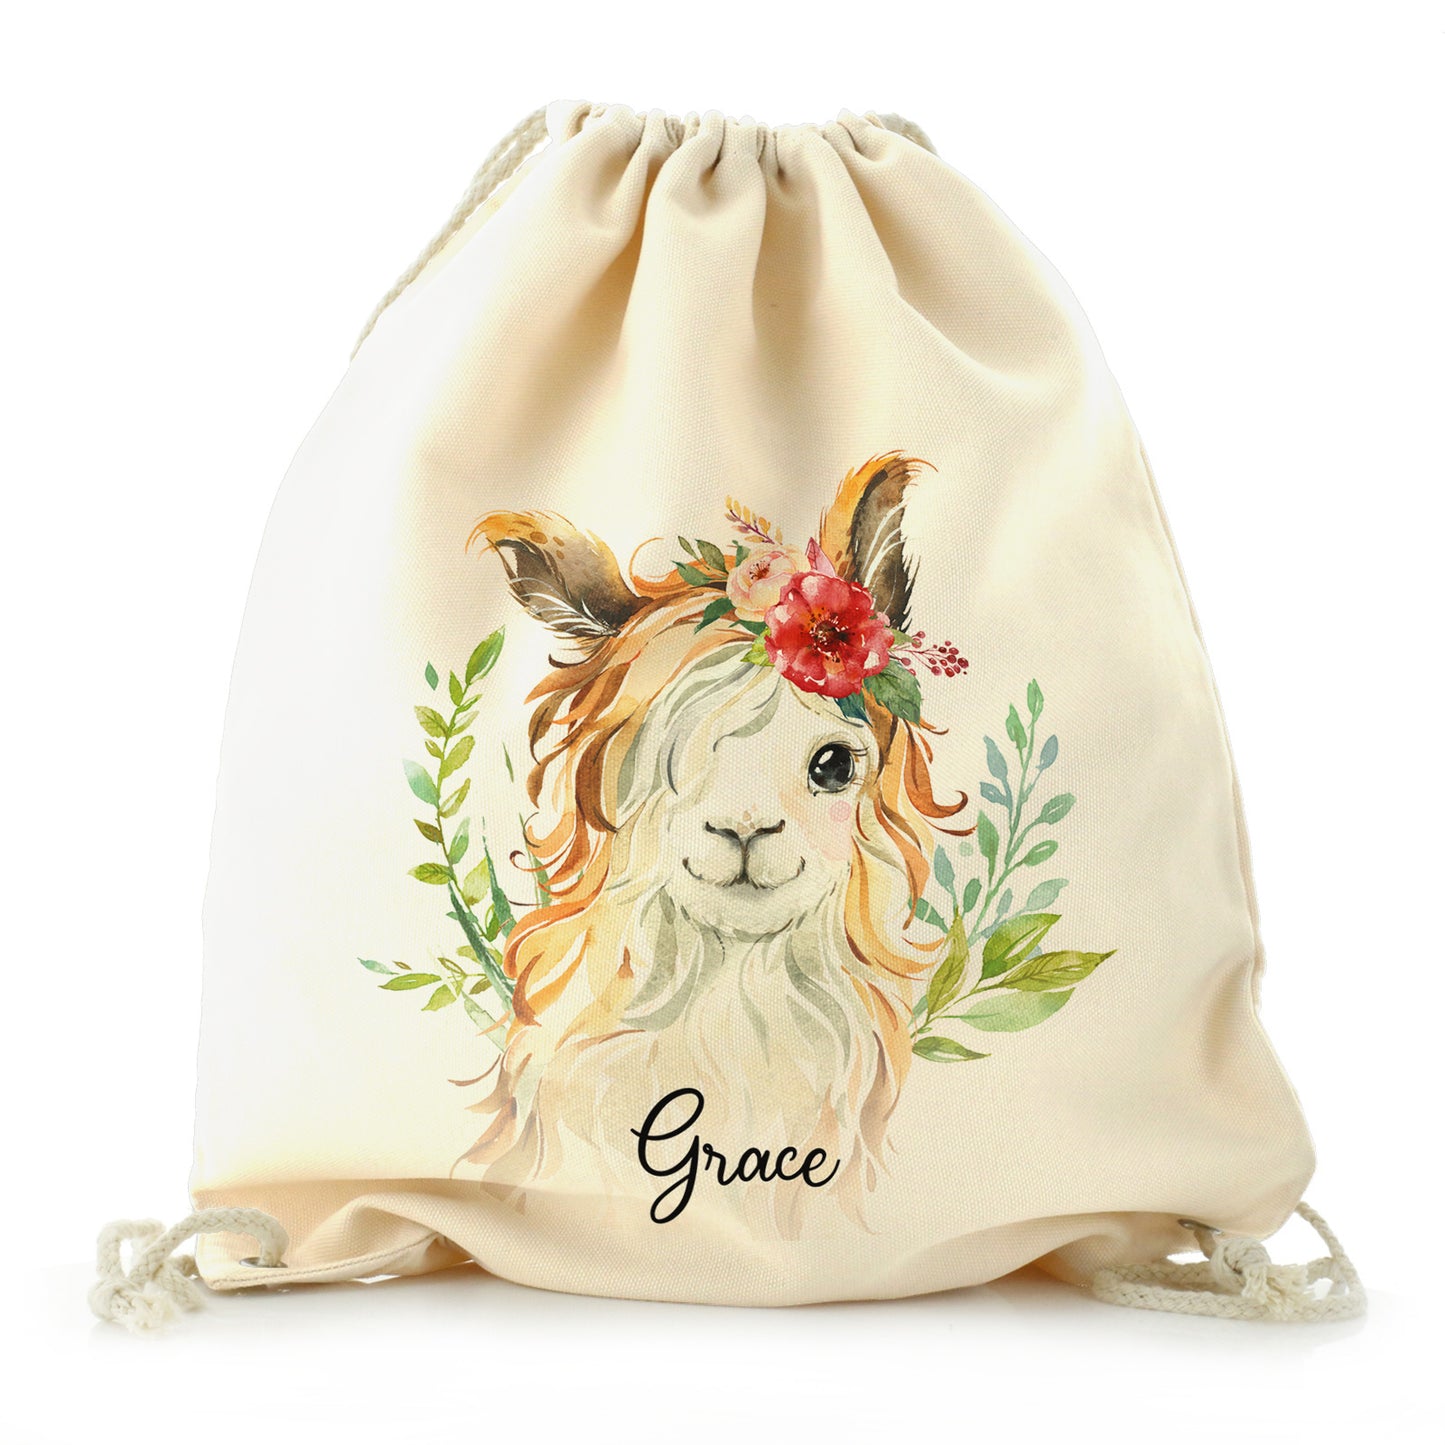 Personalised Canvas Drawstring Backpack with White Goat with Red Flower Hair and Cute Text